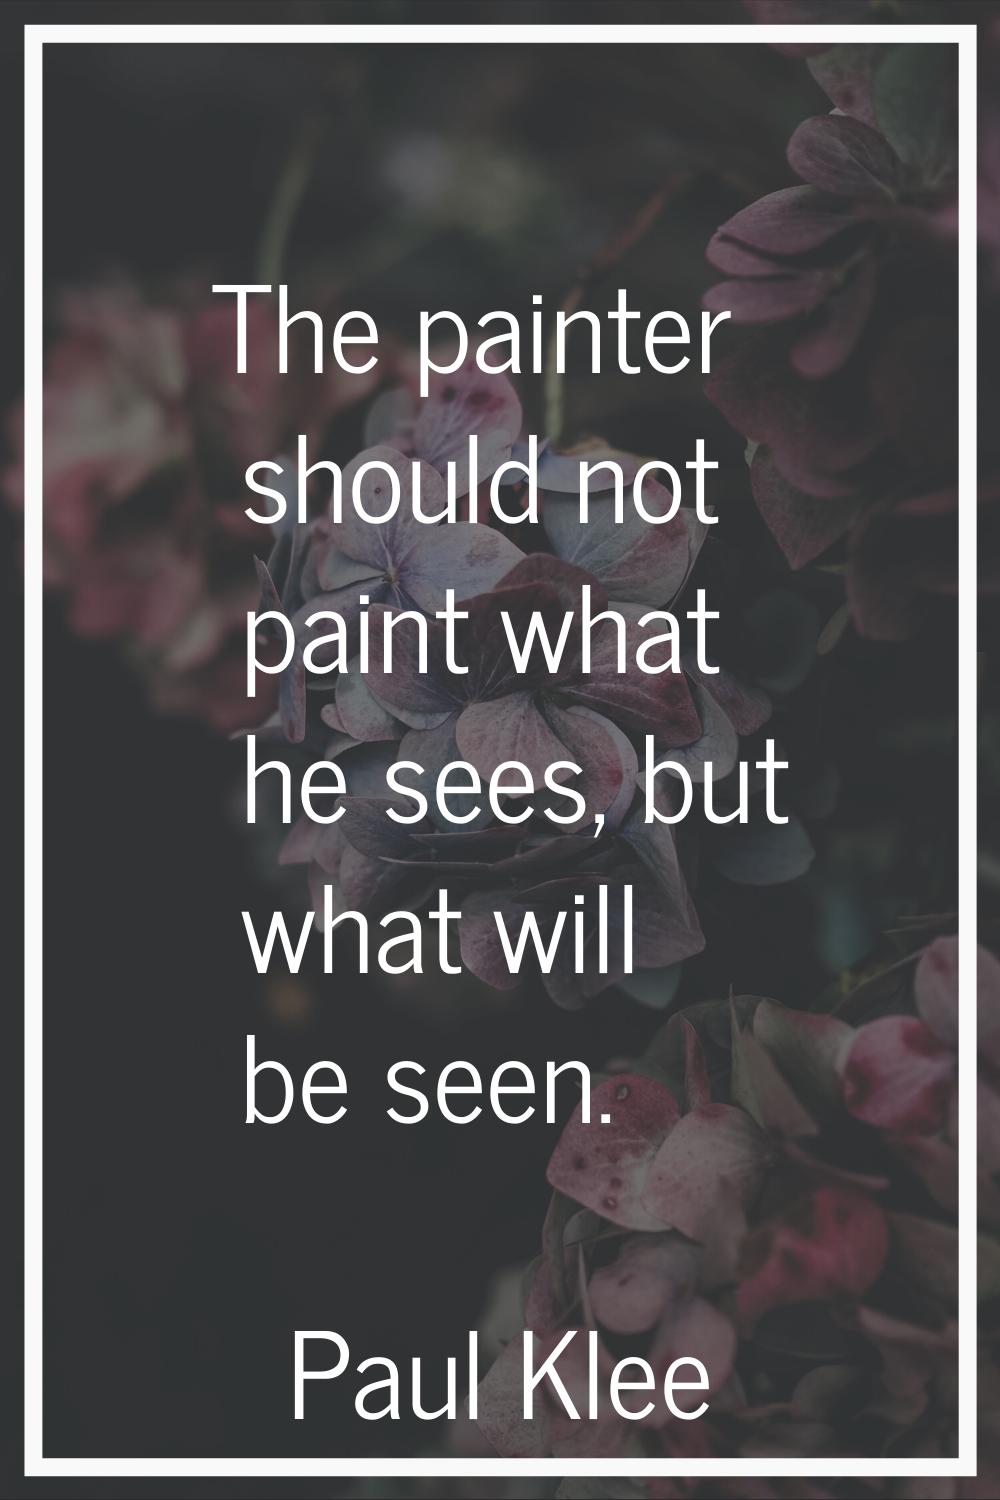 The painter should not paint what he sees, but what will be seen.